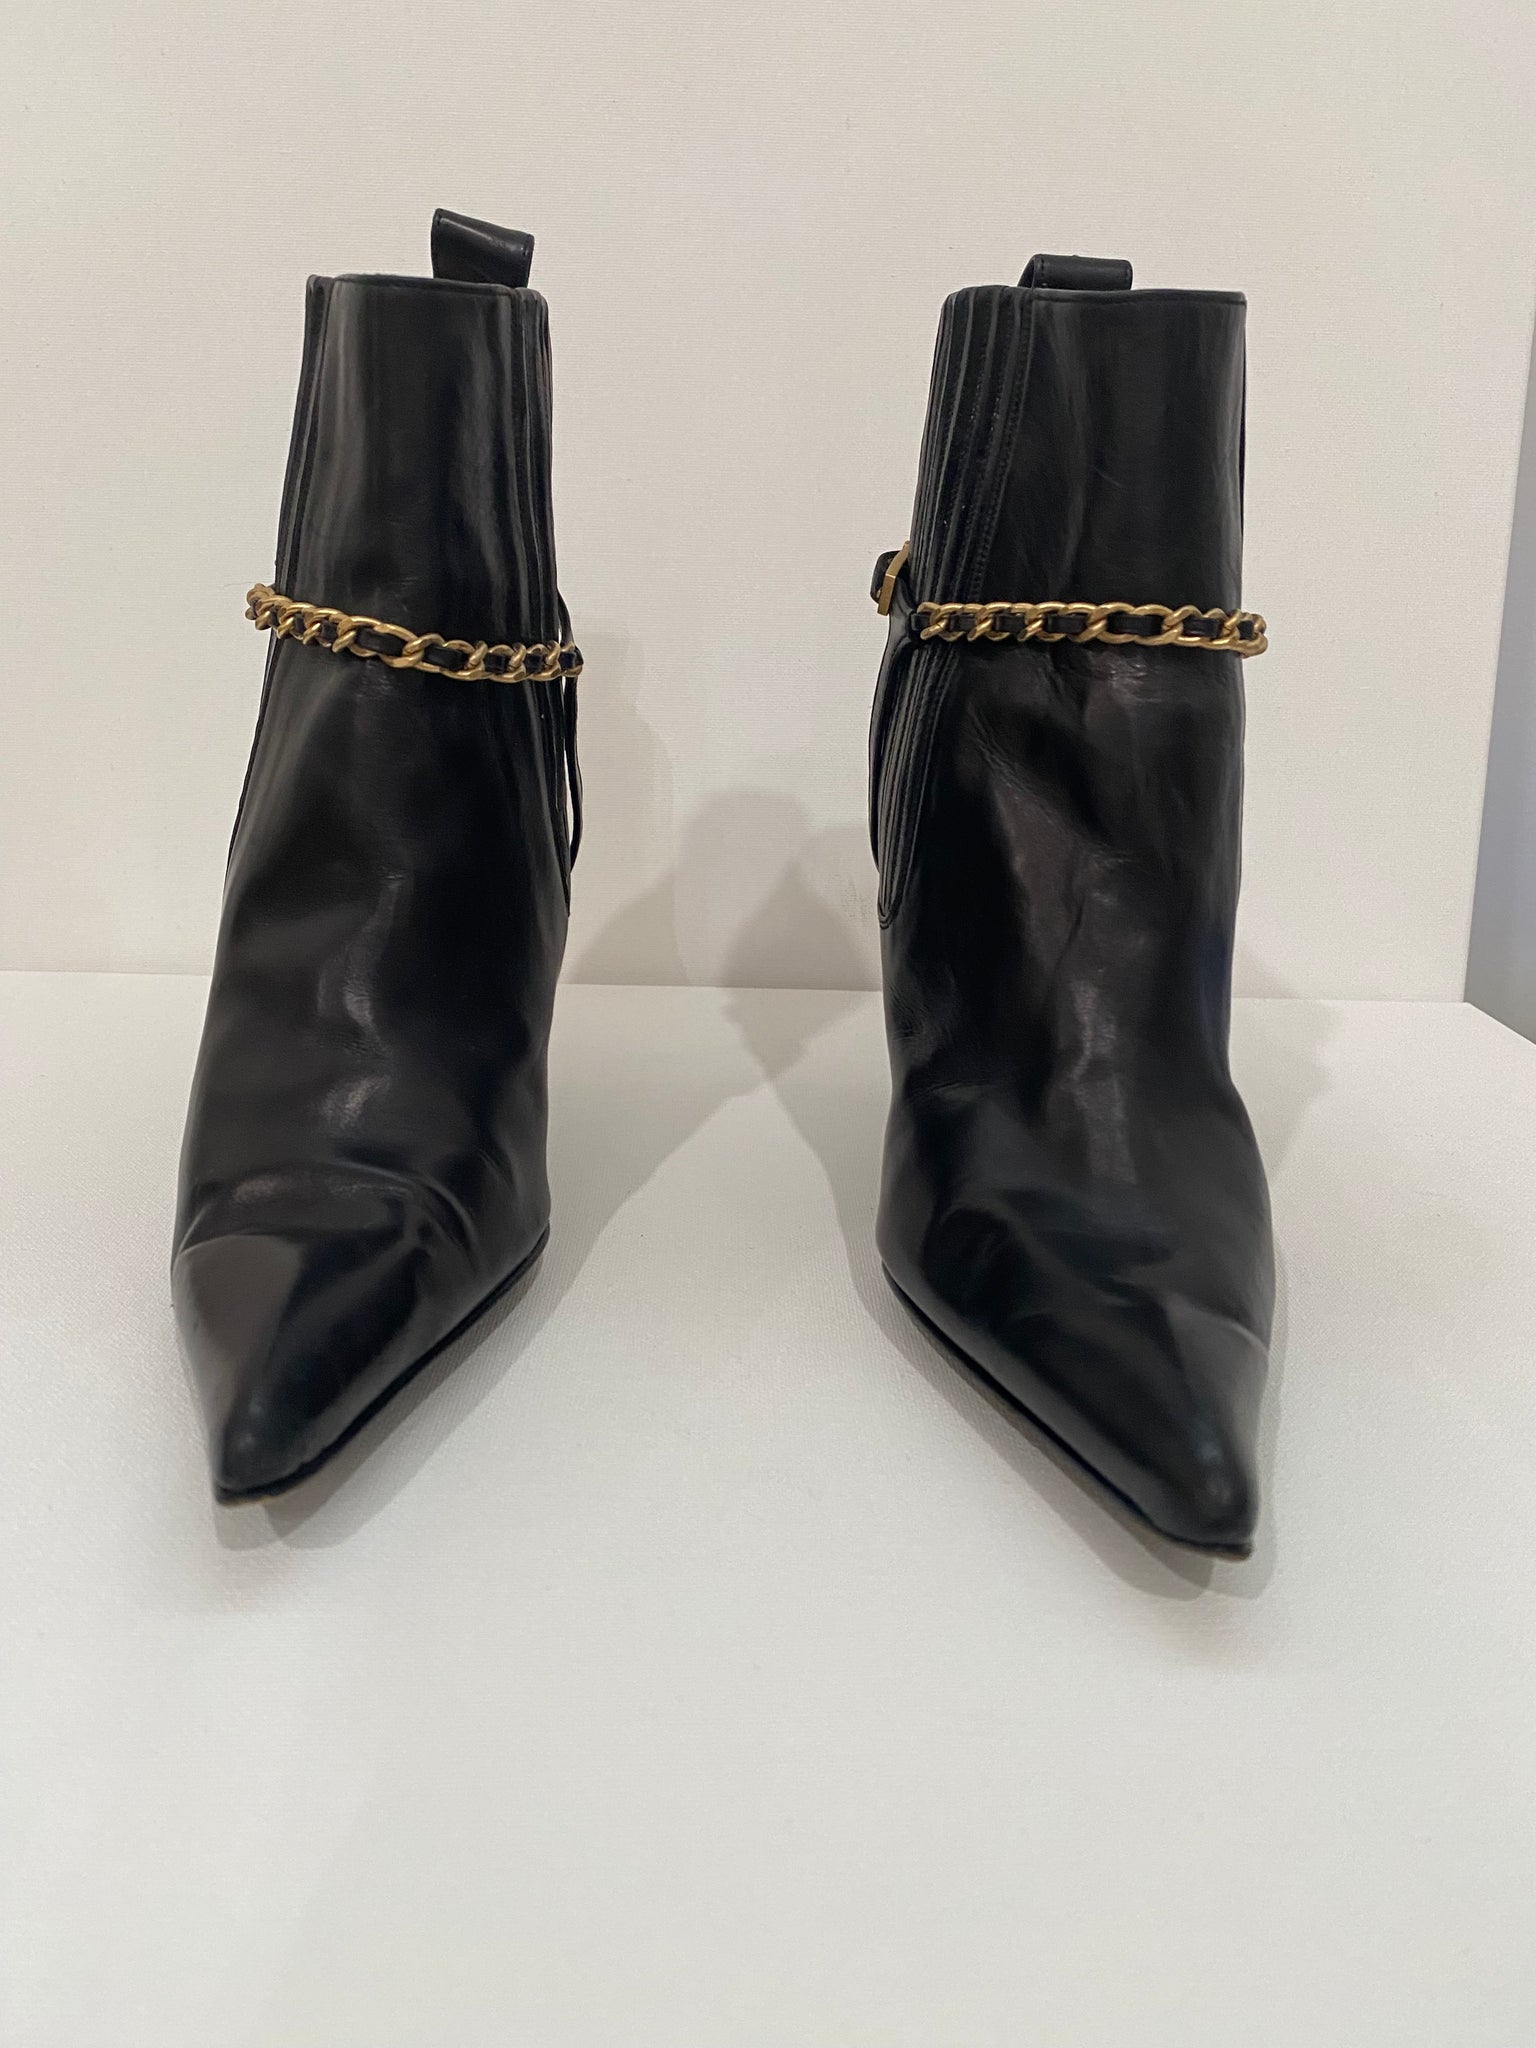 Vintage 90's Chanel Black Leather Pointed Toe Boots